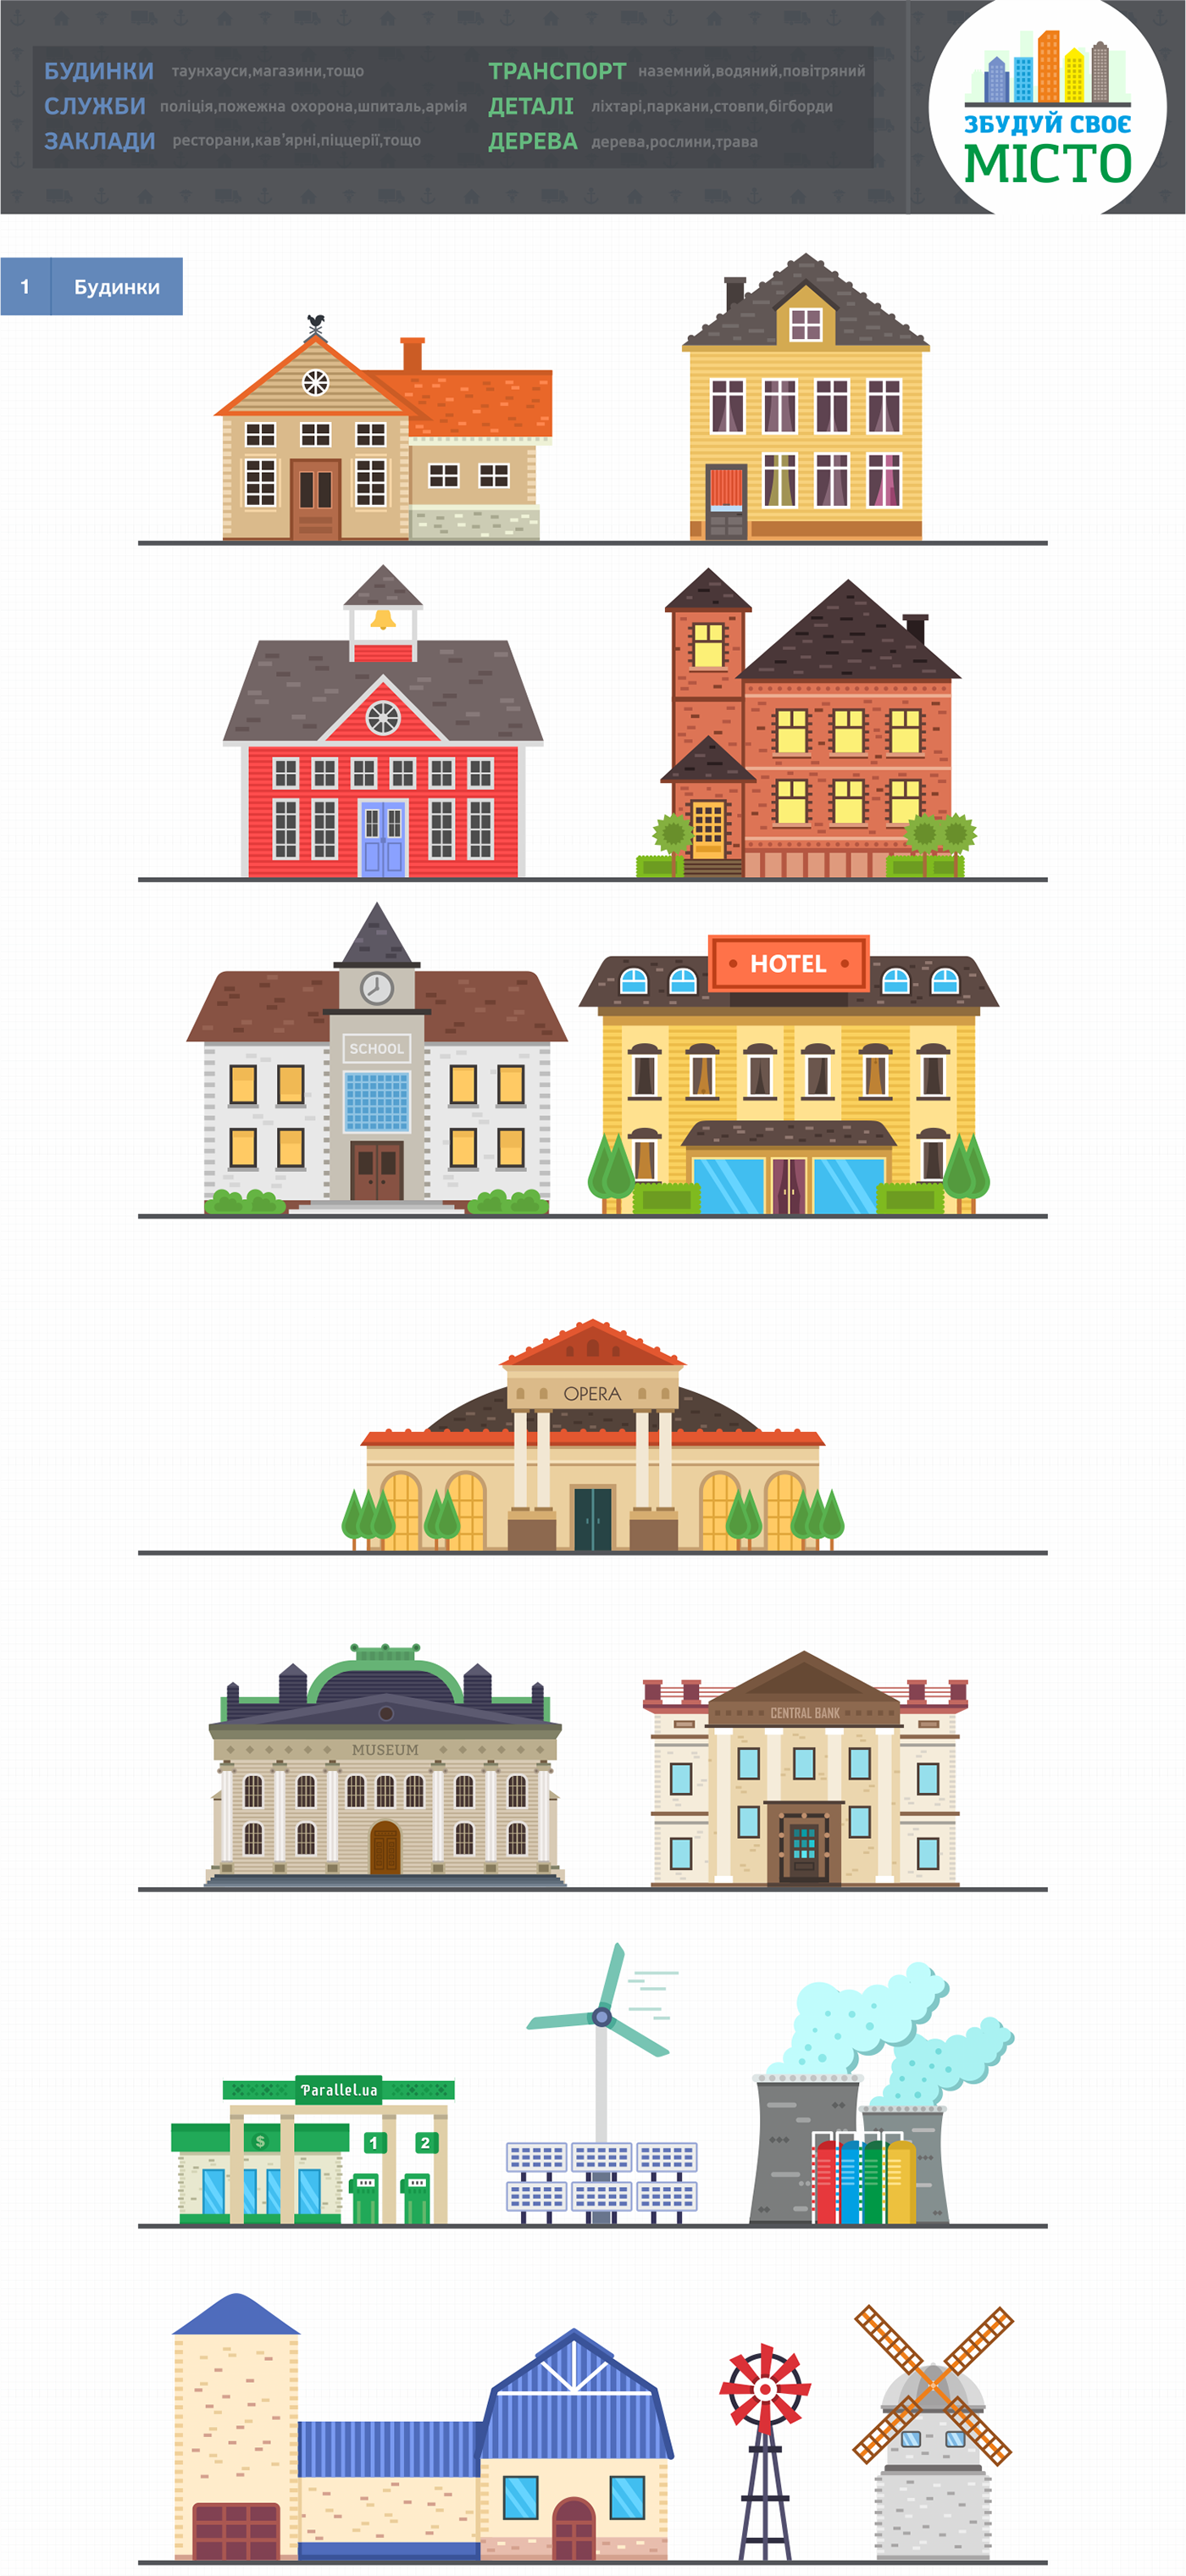 town details houses construct місто build elements city Transport vector